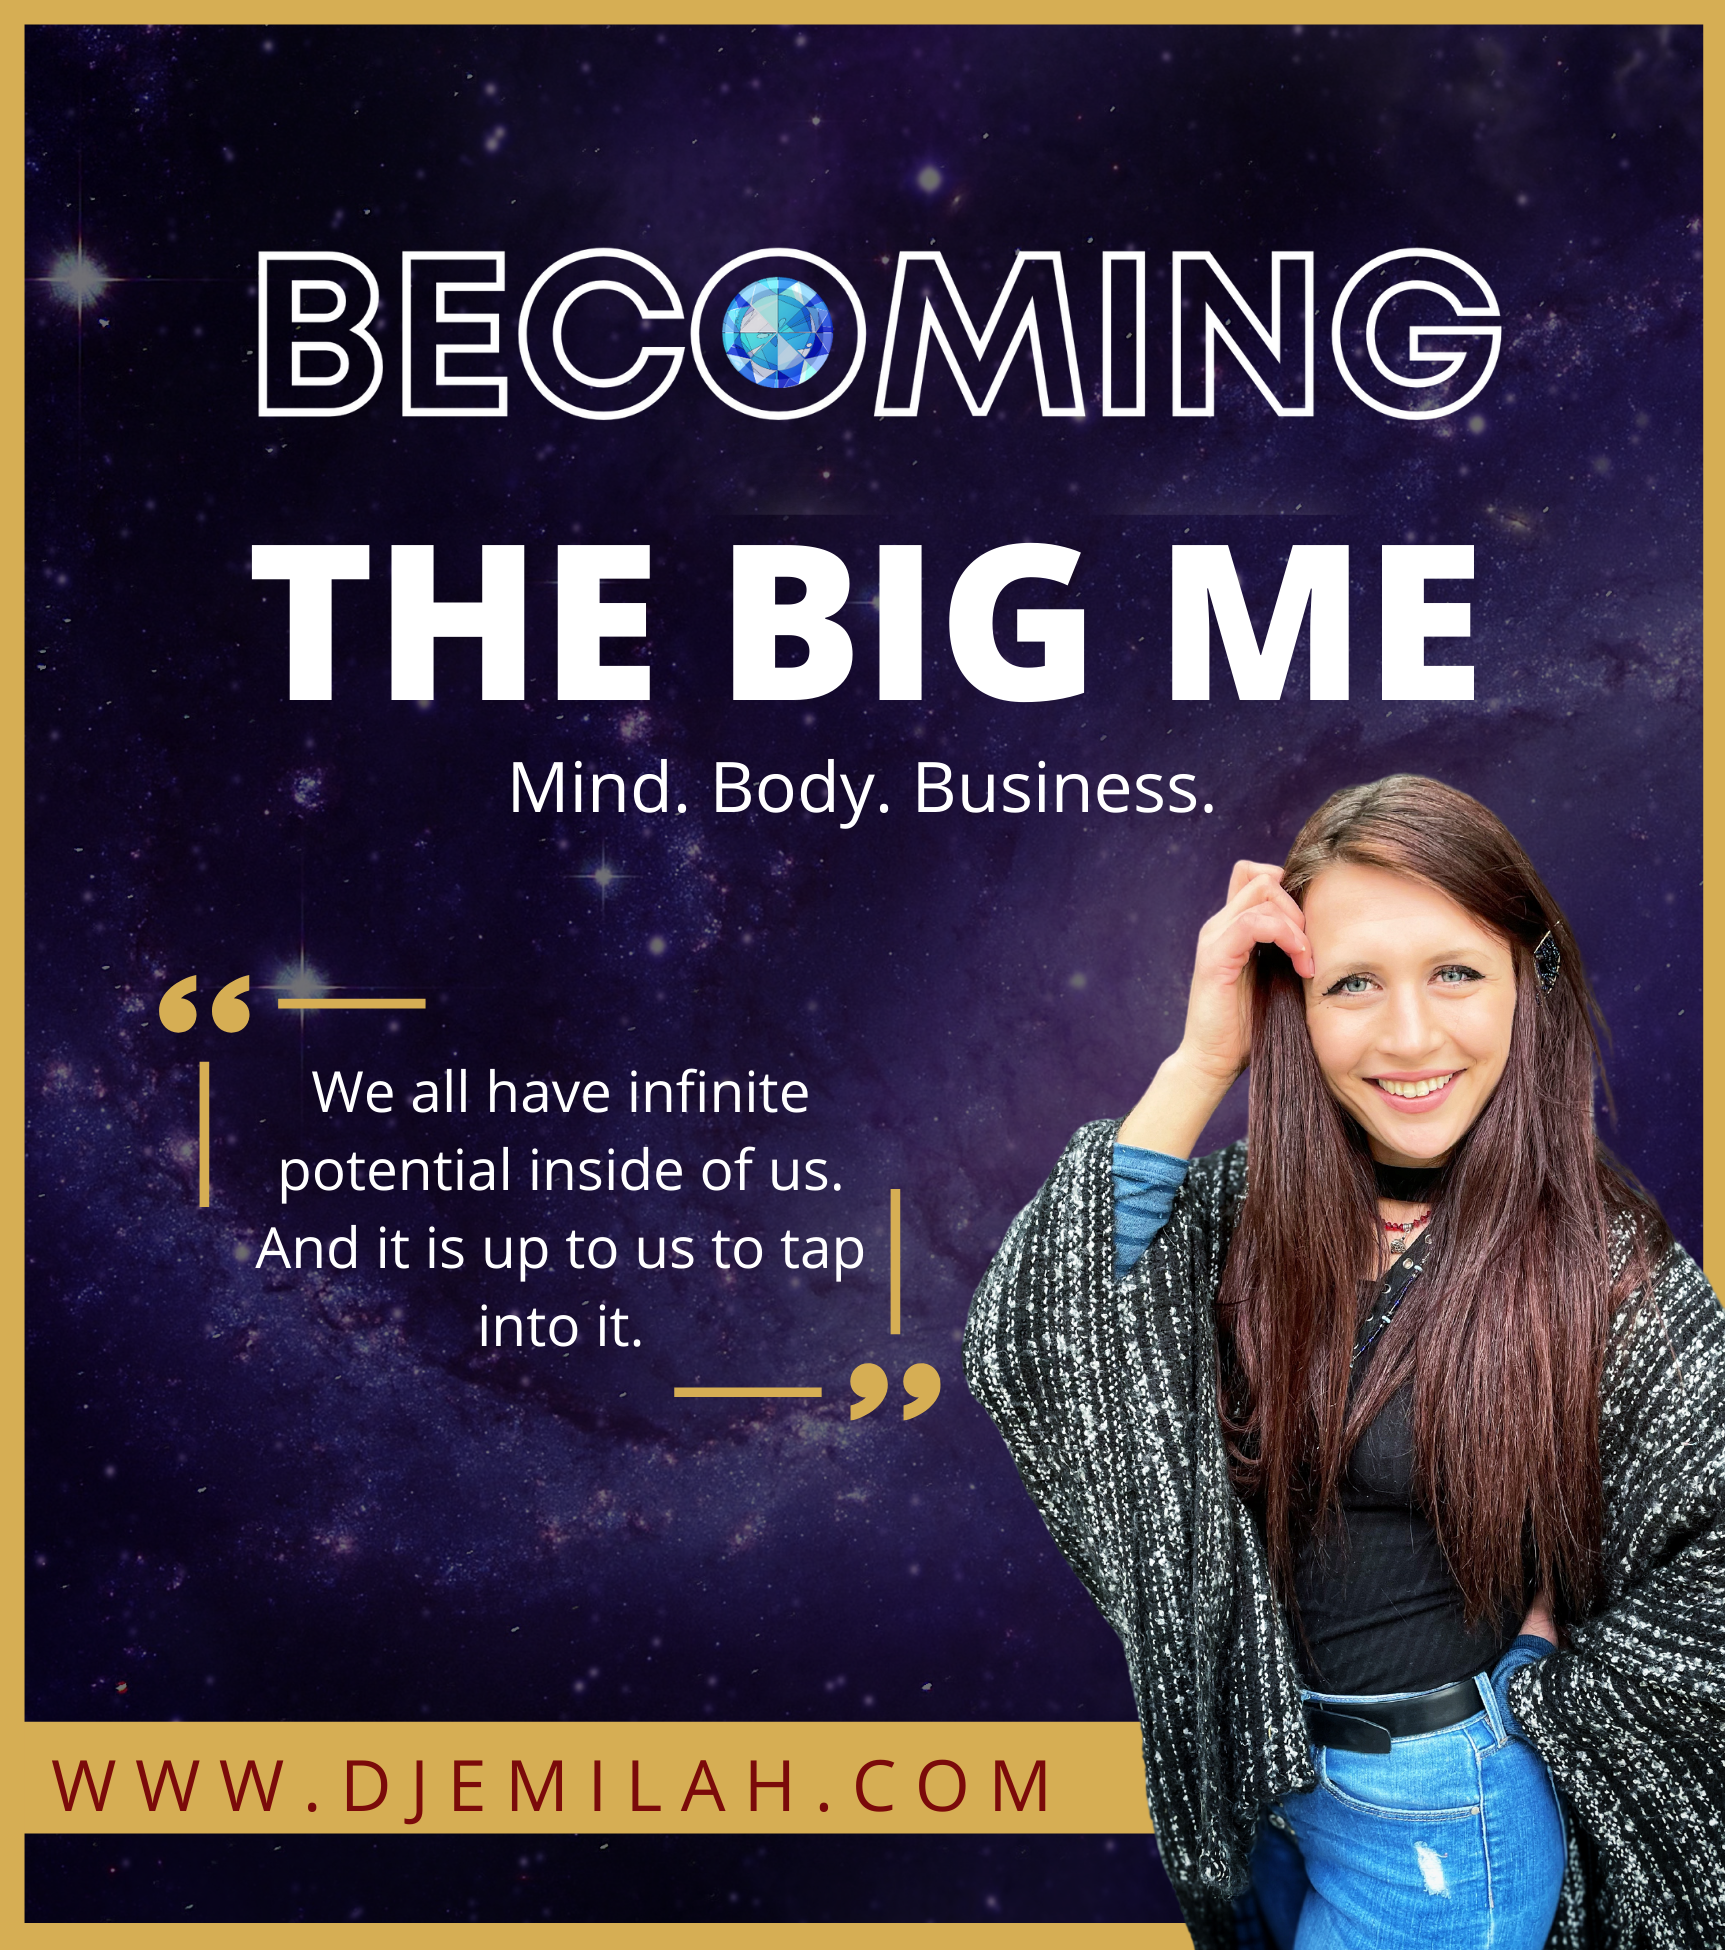 Becoming the Big Me: The Great Conquest | Djemilah Birnie | Becoming the Big Me